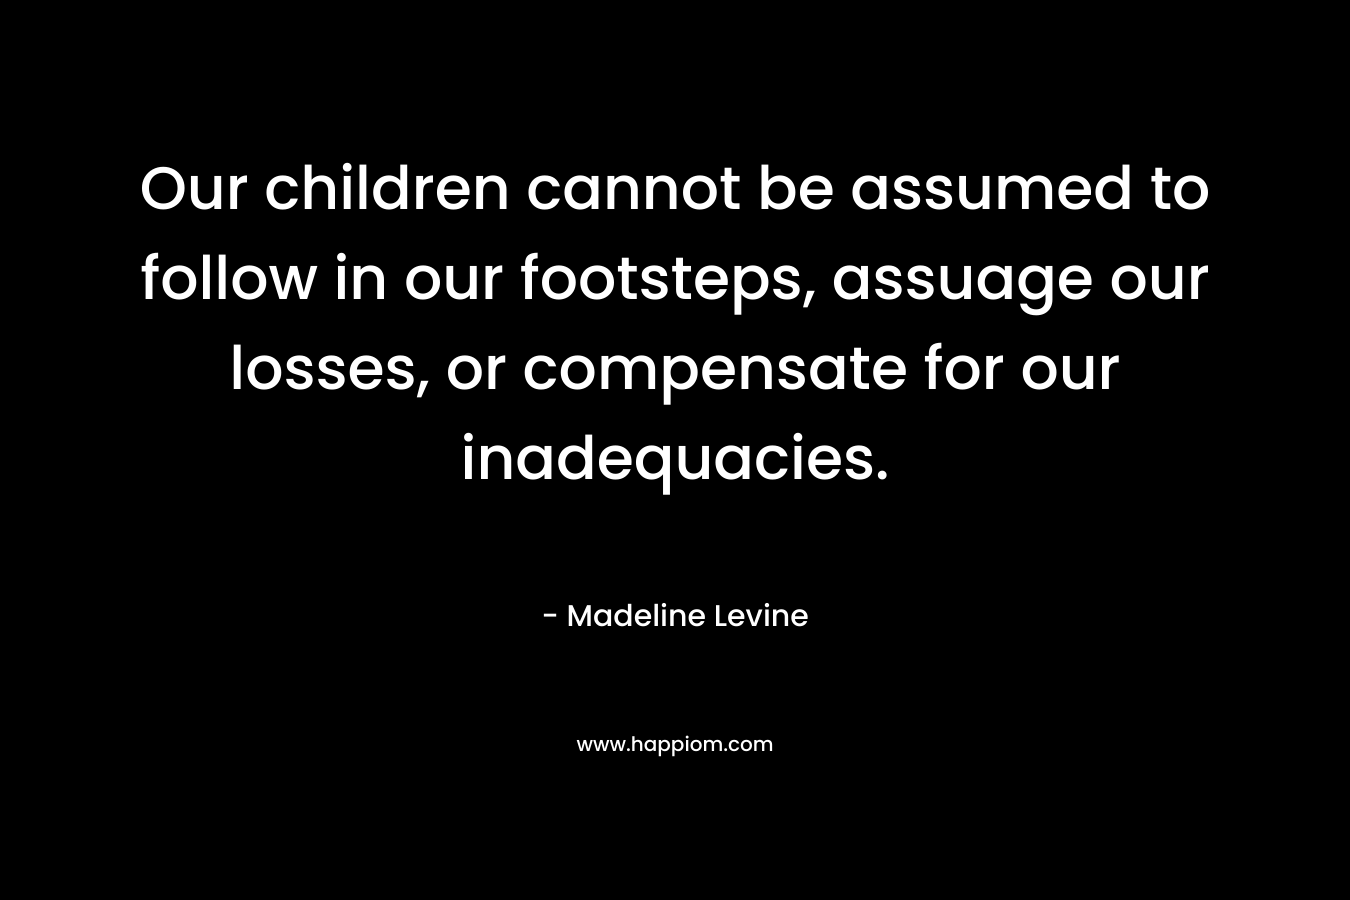 Our children cannot be assumed to follow in our footsteps, assuage our losses, or compensate for our inadequacies. – Madeline Levine